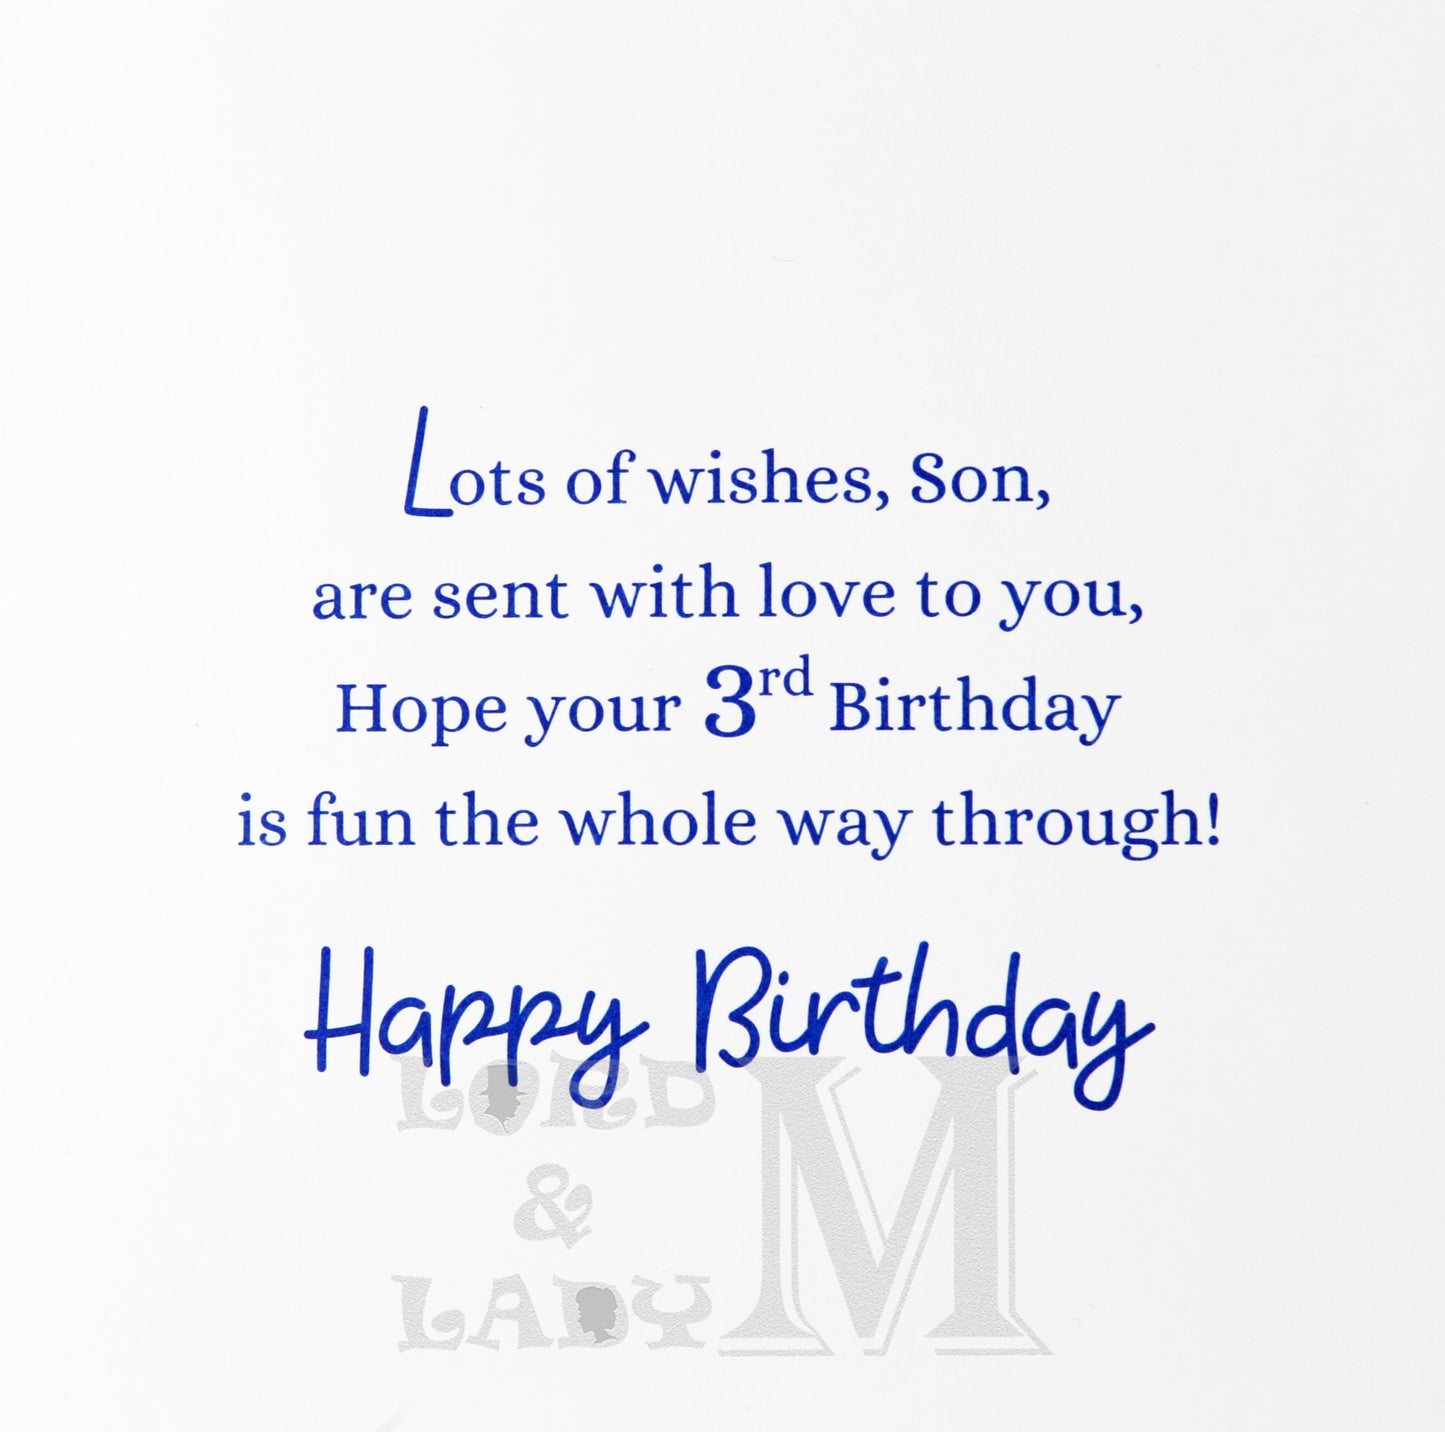 23cm - For A Very Special Son 3 Today! - Cars -BGC